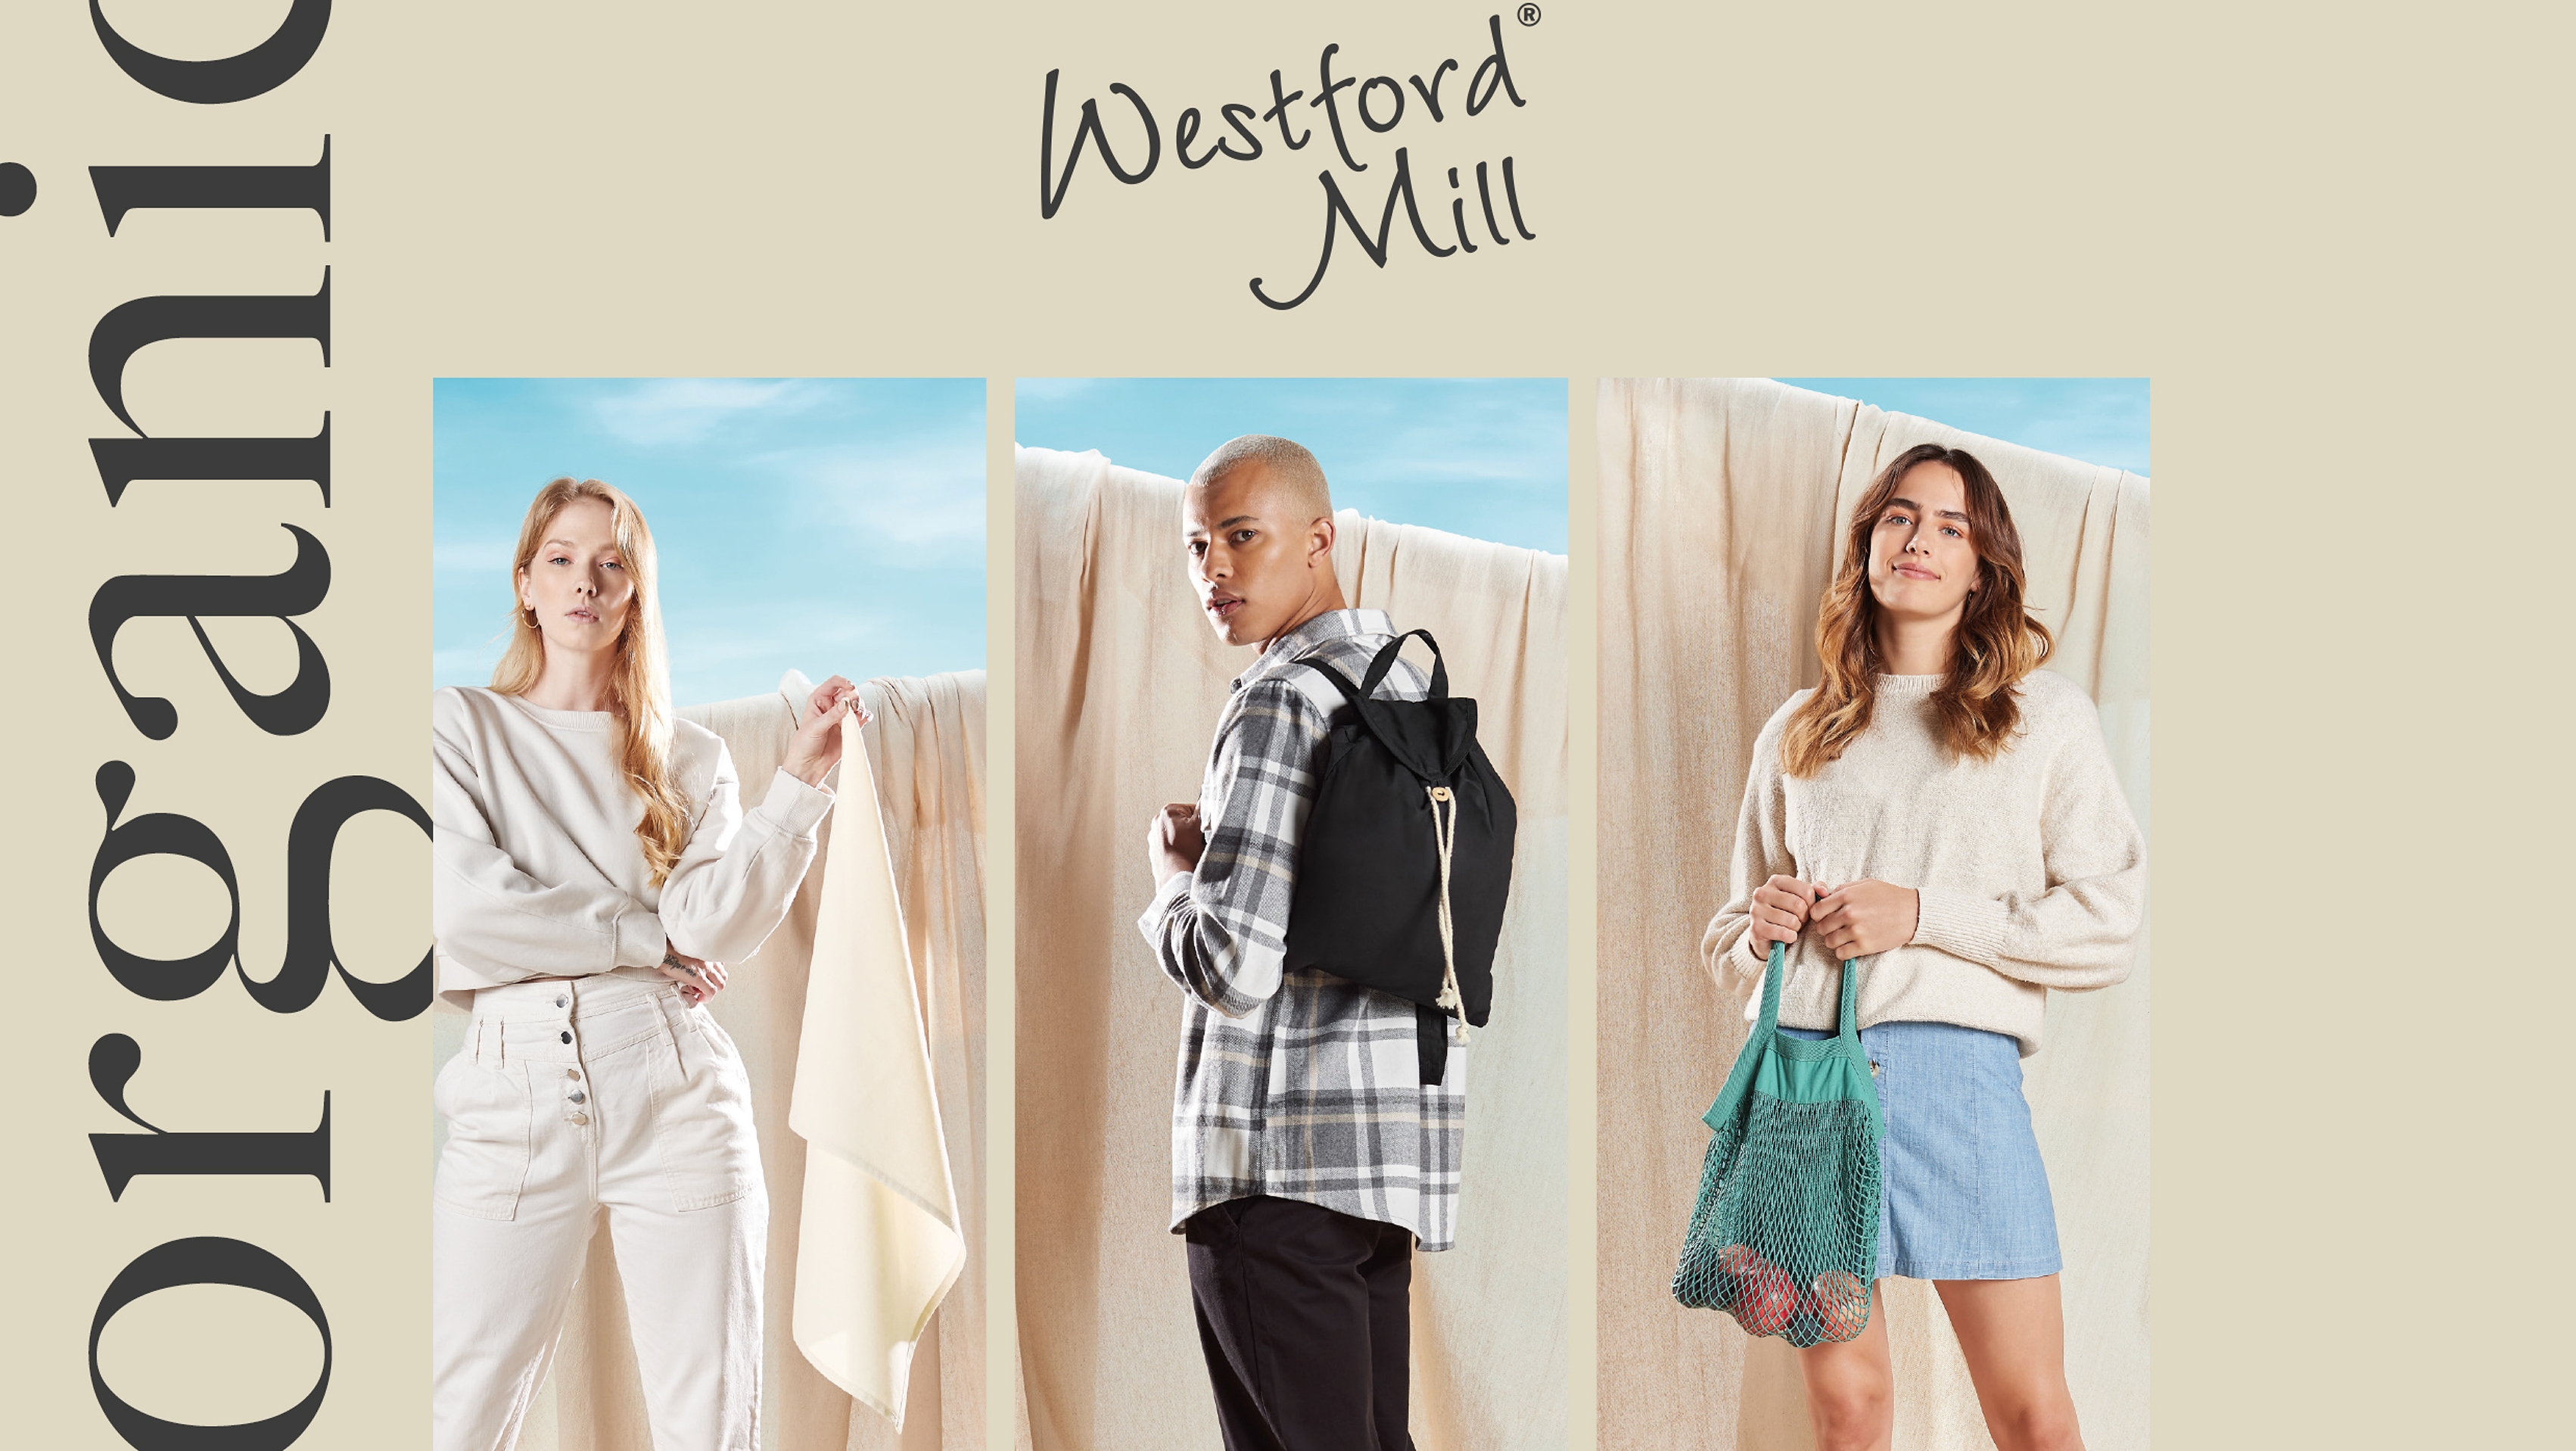 <p>A range of environmentally friendly Fairtrade Cotton and Westford Mill items</p>
